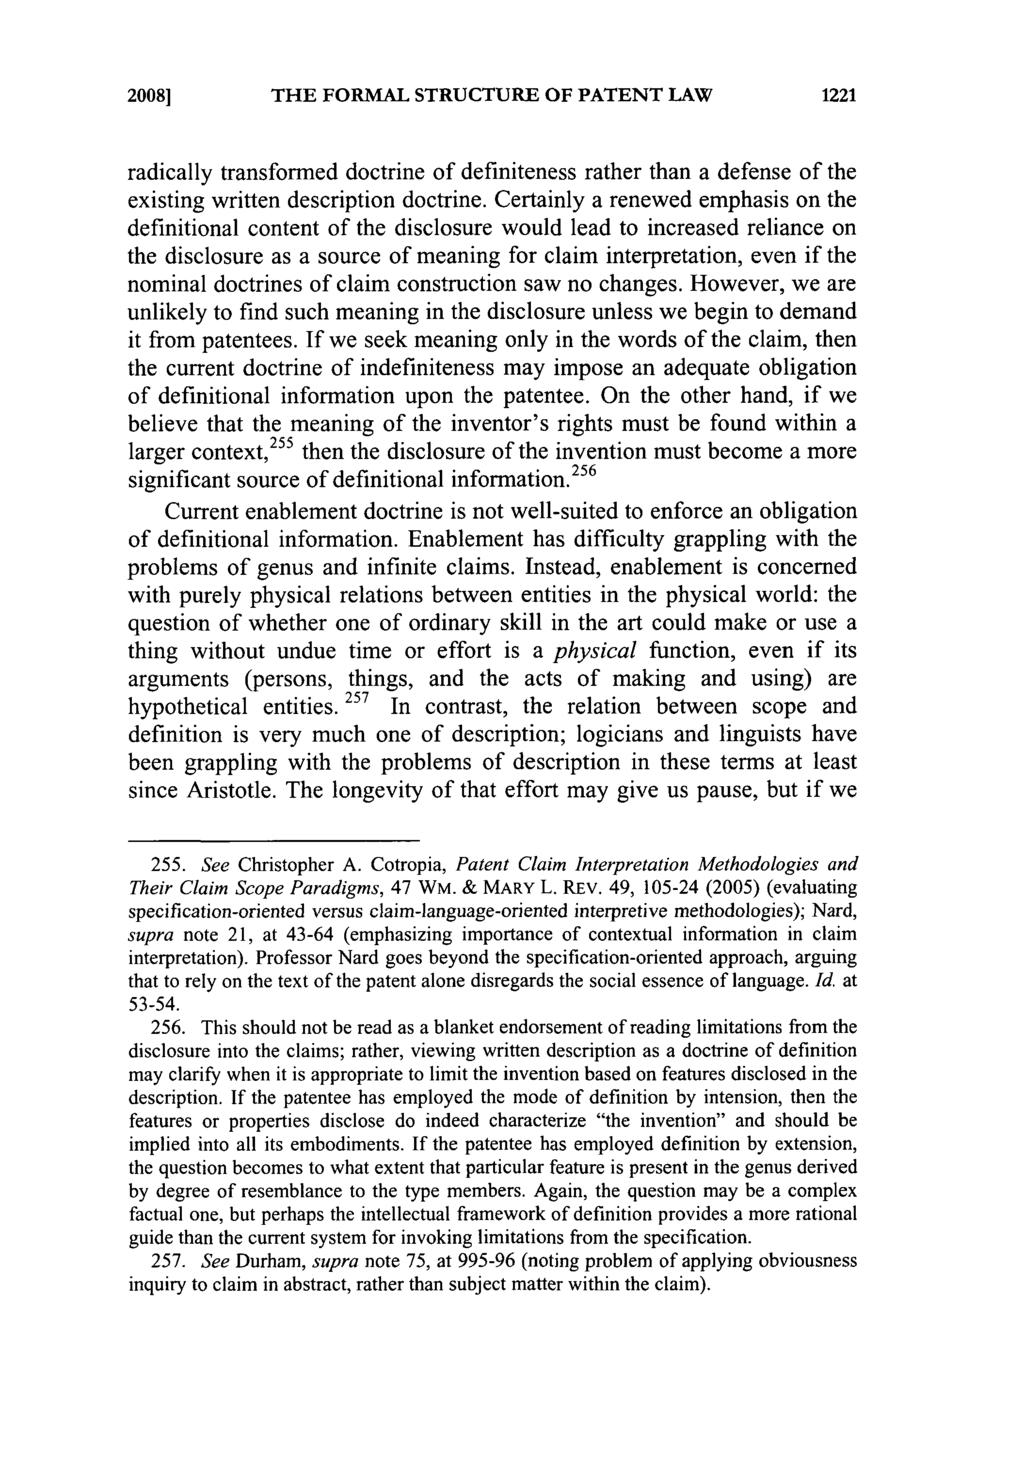 20081 THE FORMAL STRUCTURE OF PATENT LAW radically transformed doctrine of definiteness rather than a defense of the existing written description doctrine.